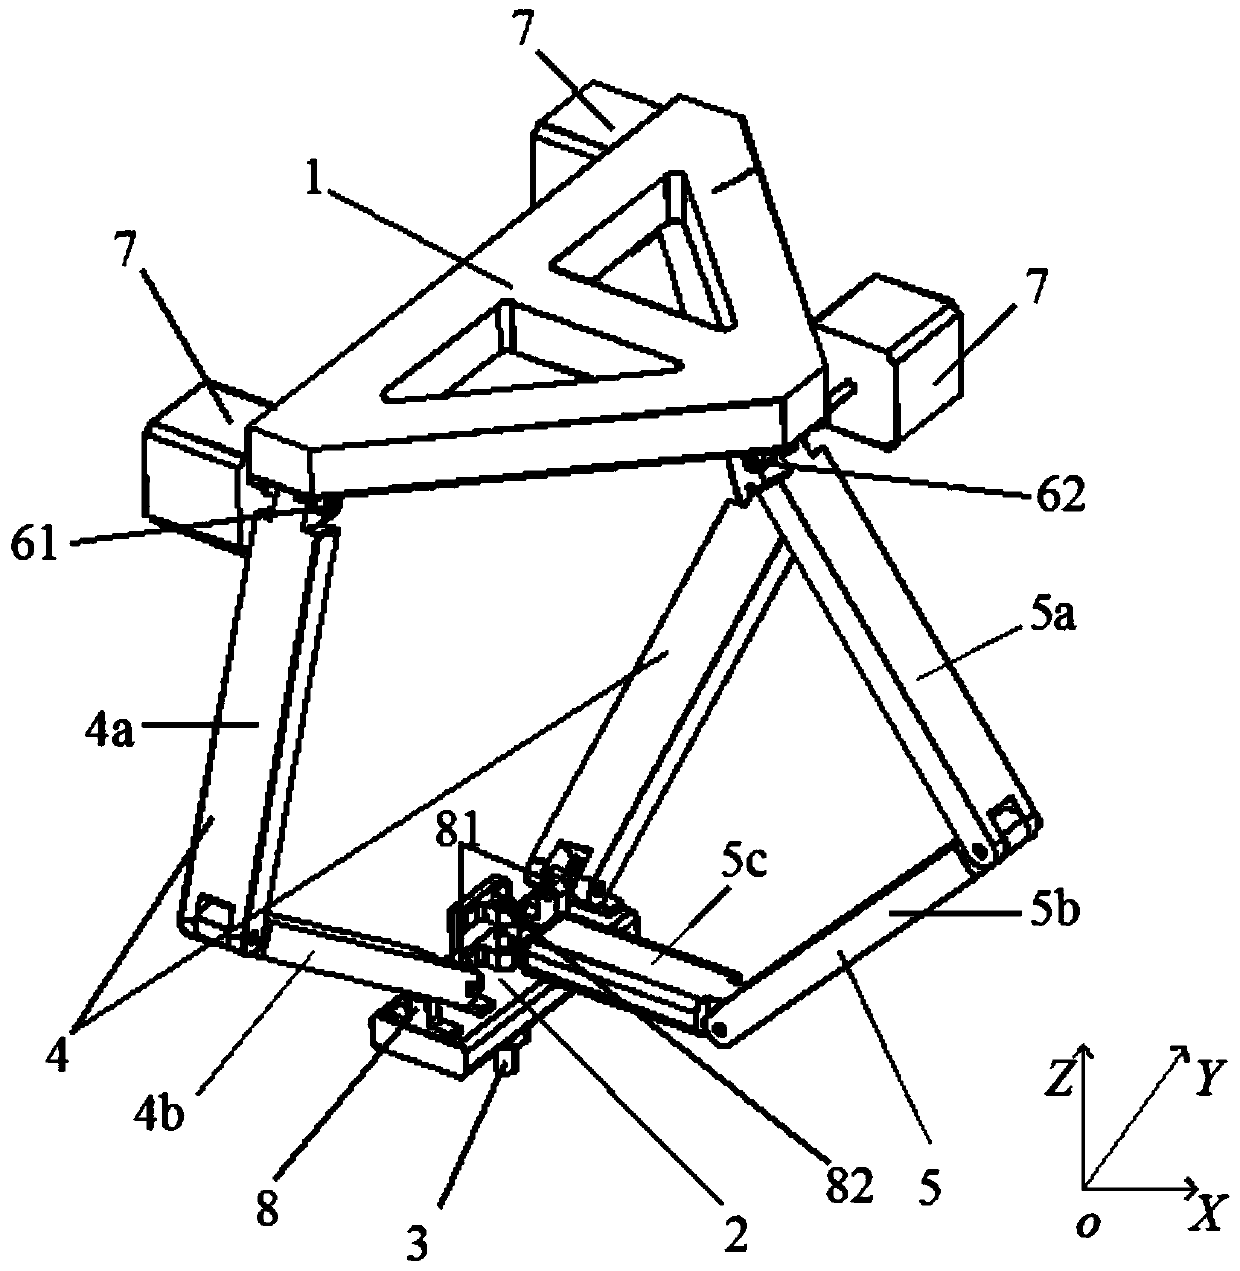 Three-degree-of-freedom parallel mechanism without accompanying movement